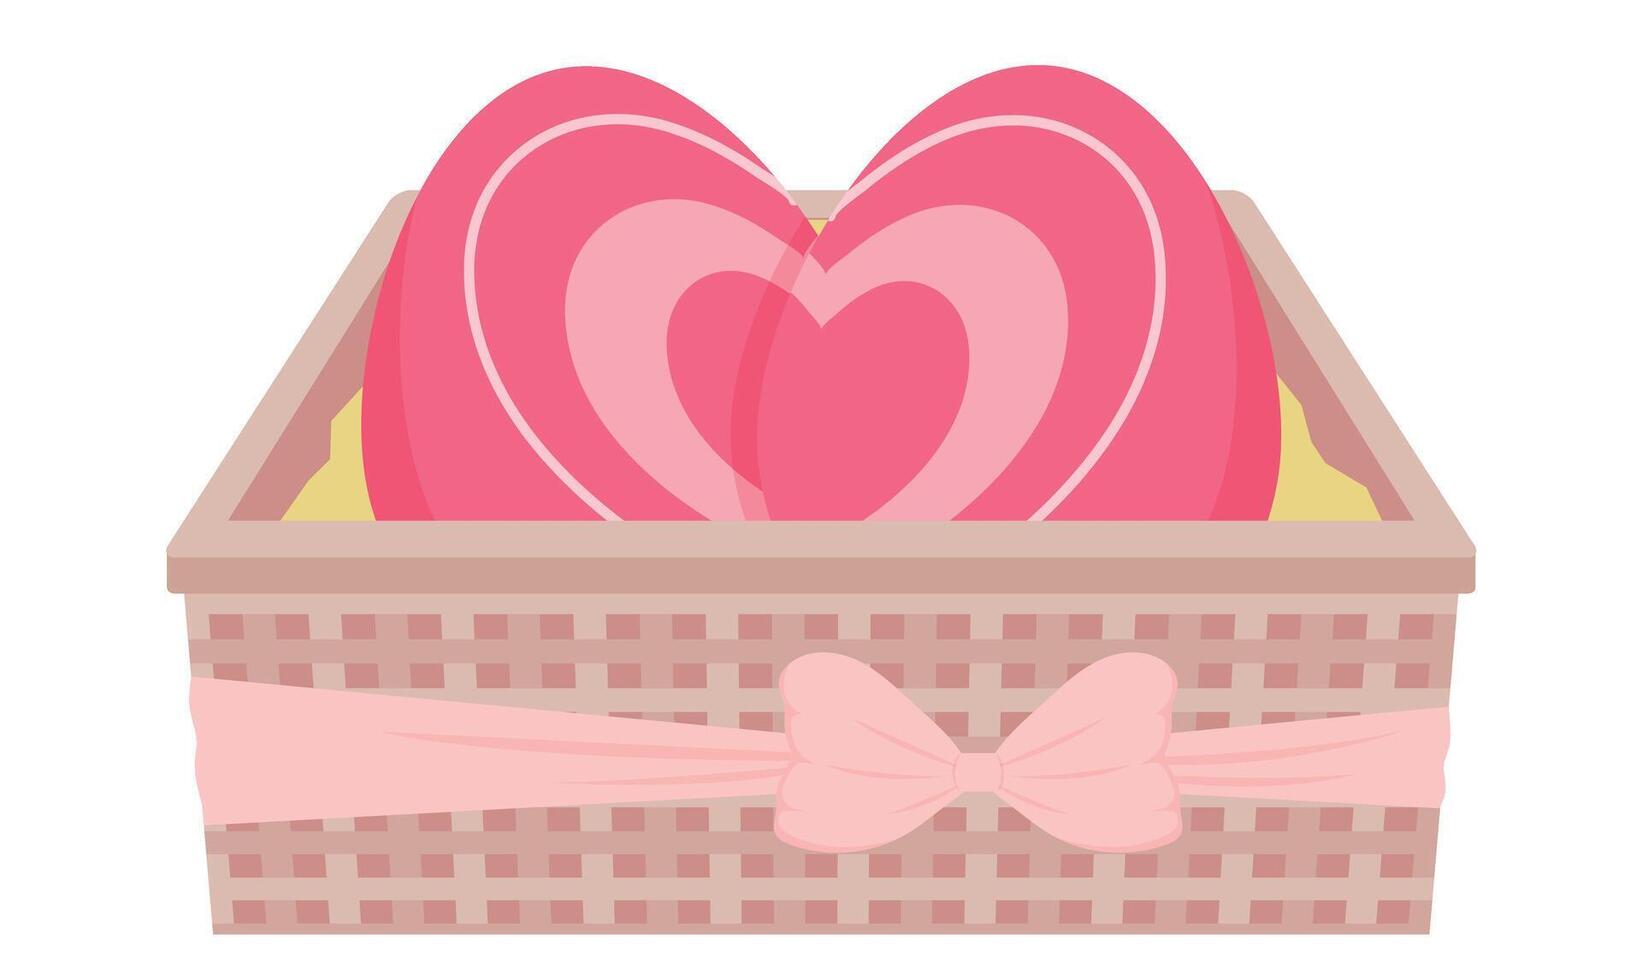 Love heart red pink basket ribbon happy valentine 14 february romantic fourteen day happy easter egg day rabbit bunny march april month passion gift beautiful character cartoon icon object drawing vector